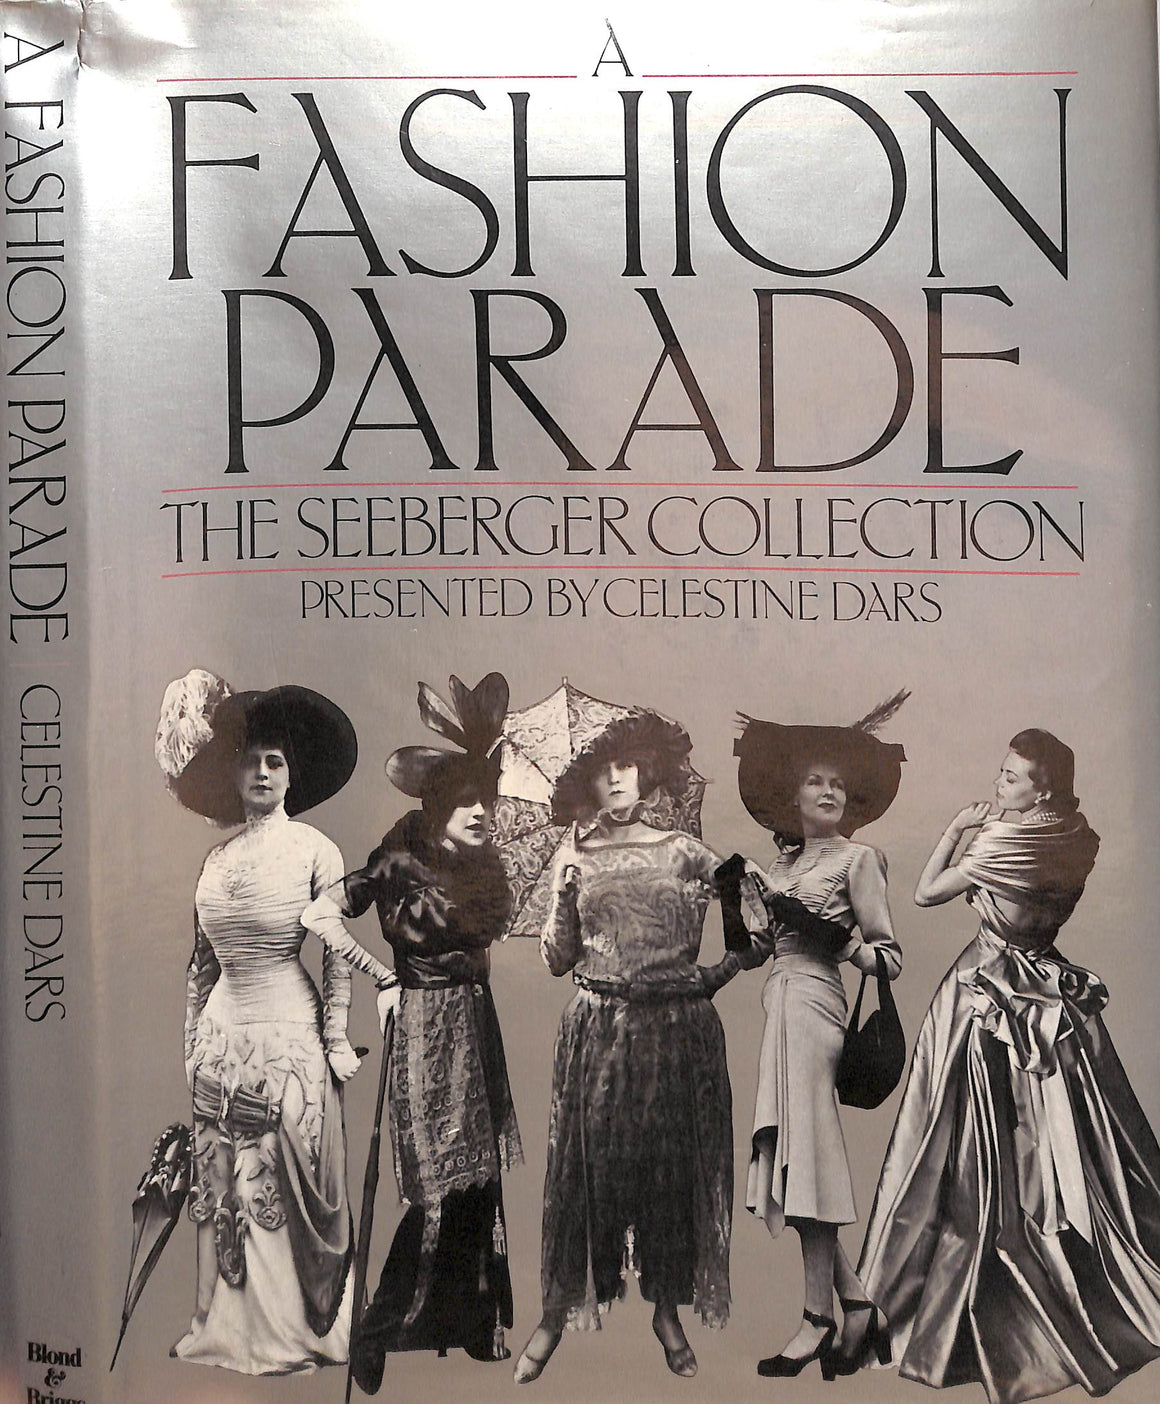 "A Fashion Parade: The Seeberger Collection" 1979 DARS, Celestine